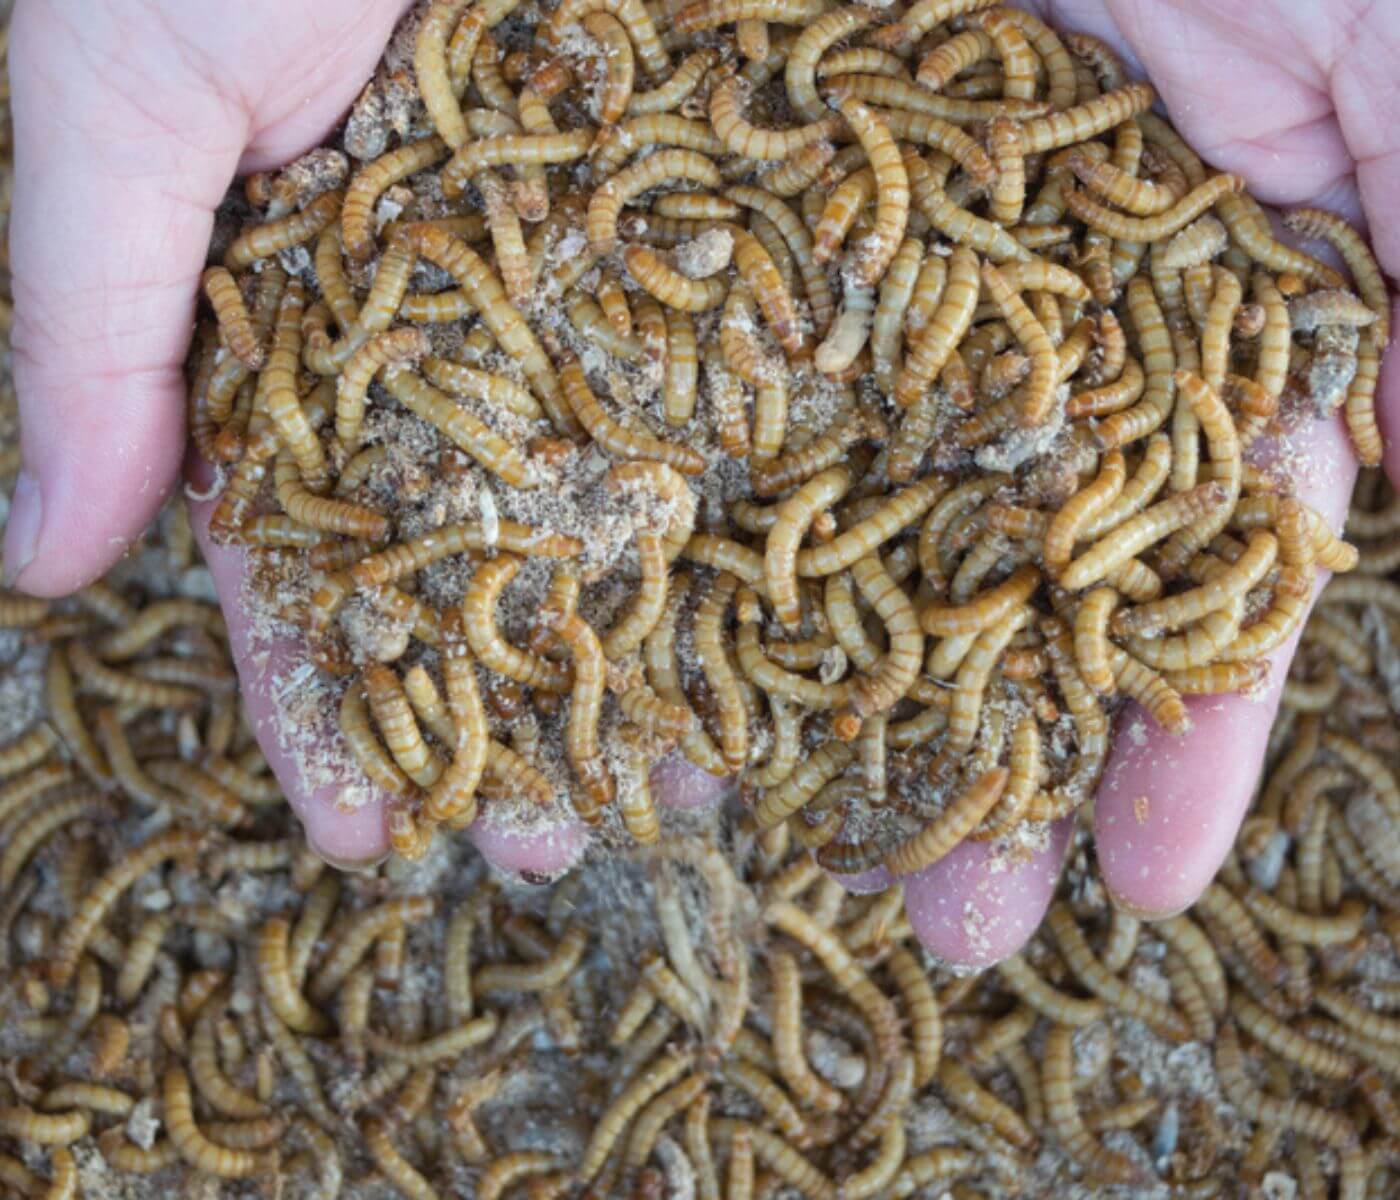 Compilation on the use of insects in poultry feed